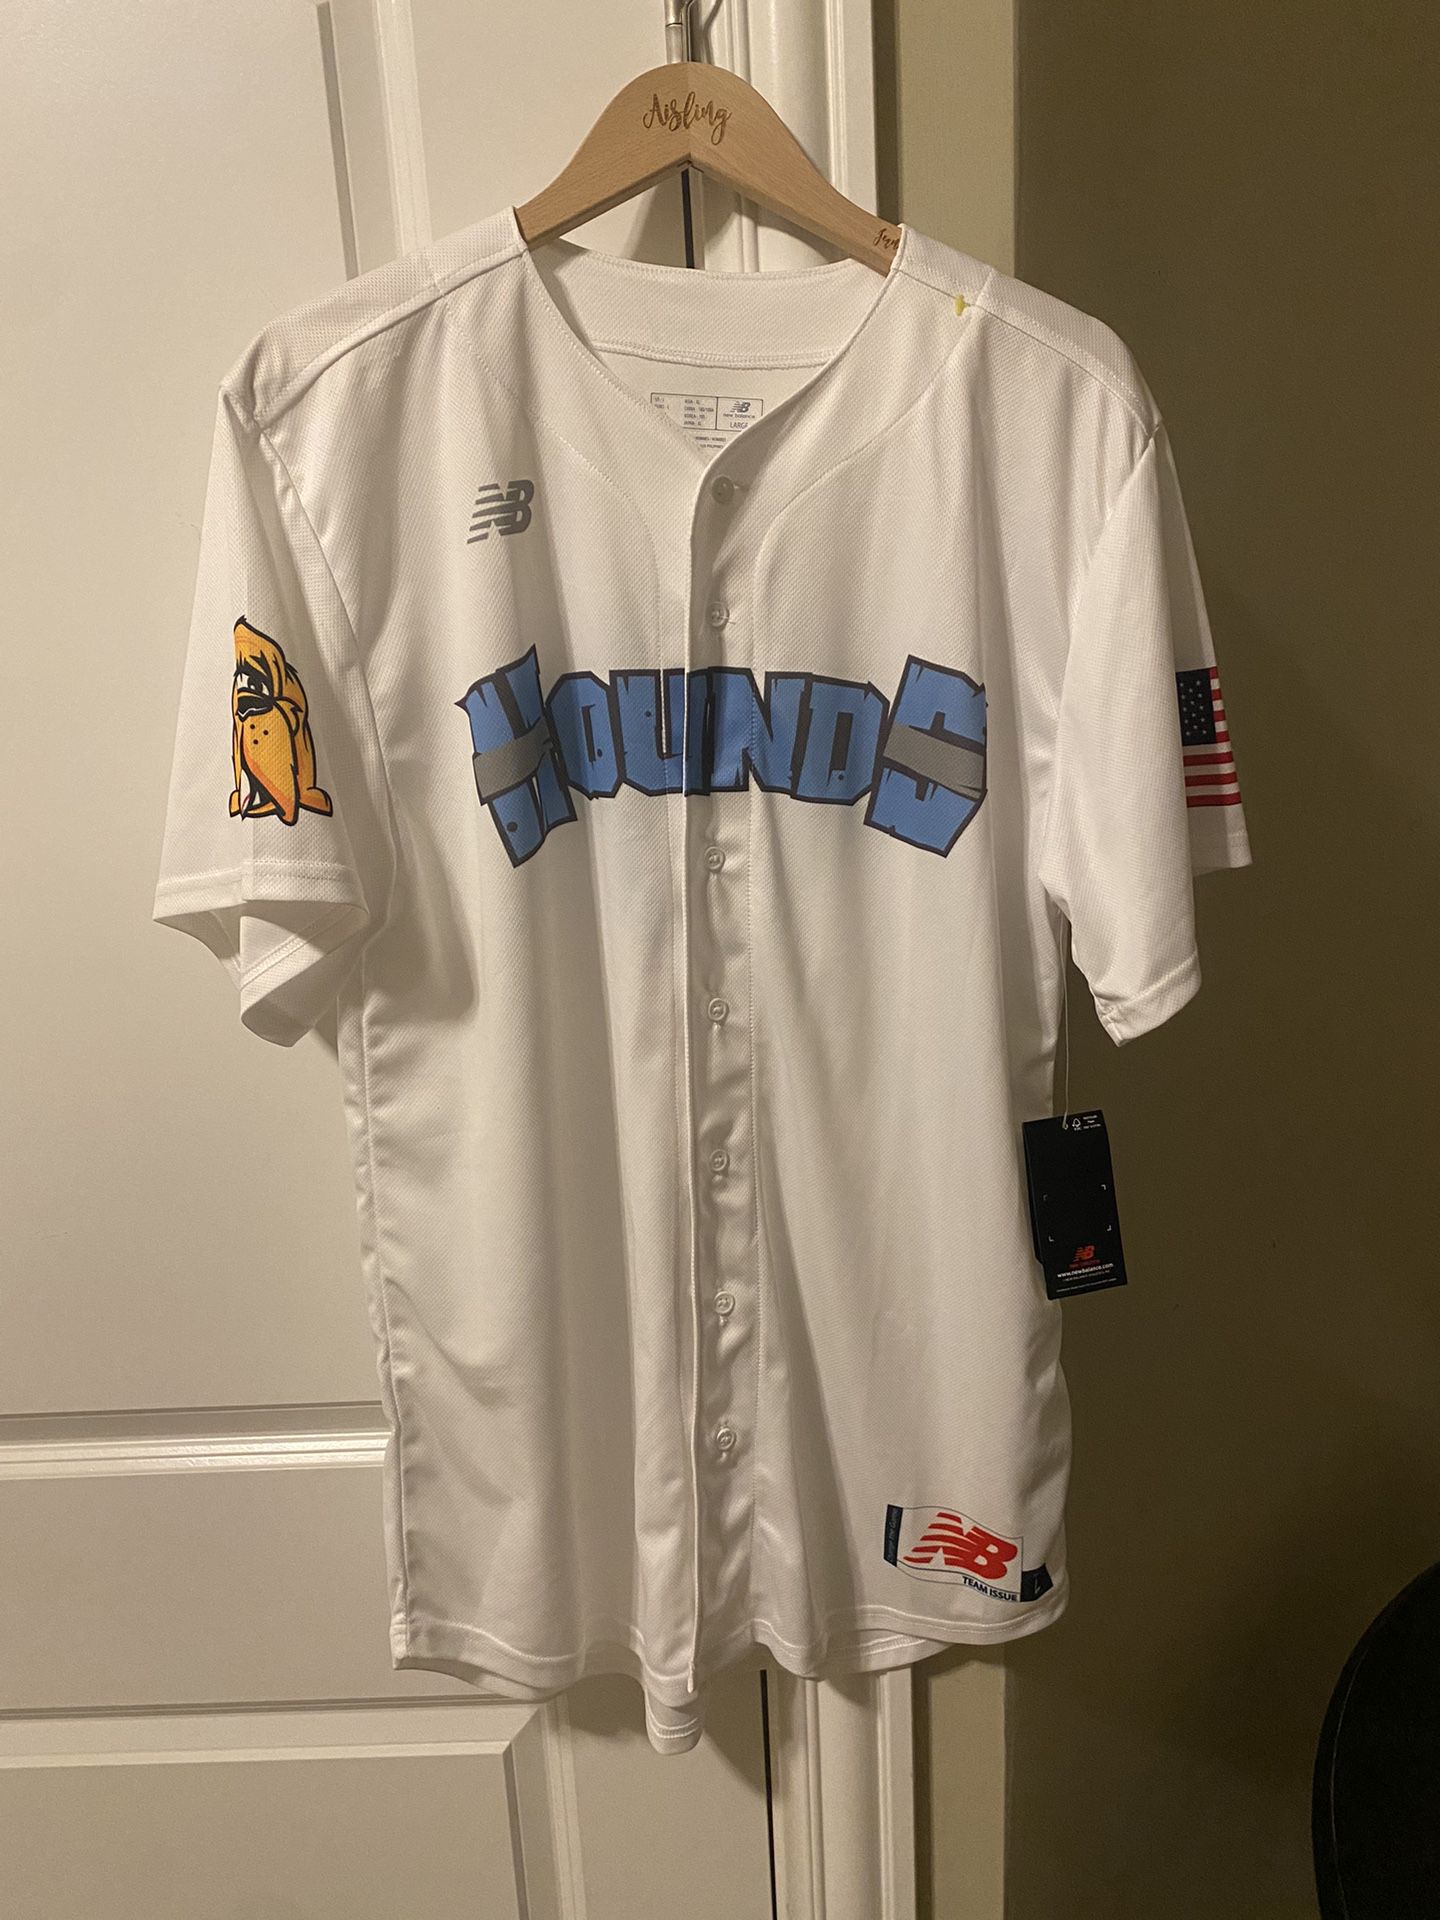 MILB Midland Rock Hounds Professional Jersey Size Large Oakland As New NWT L